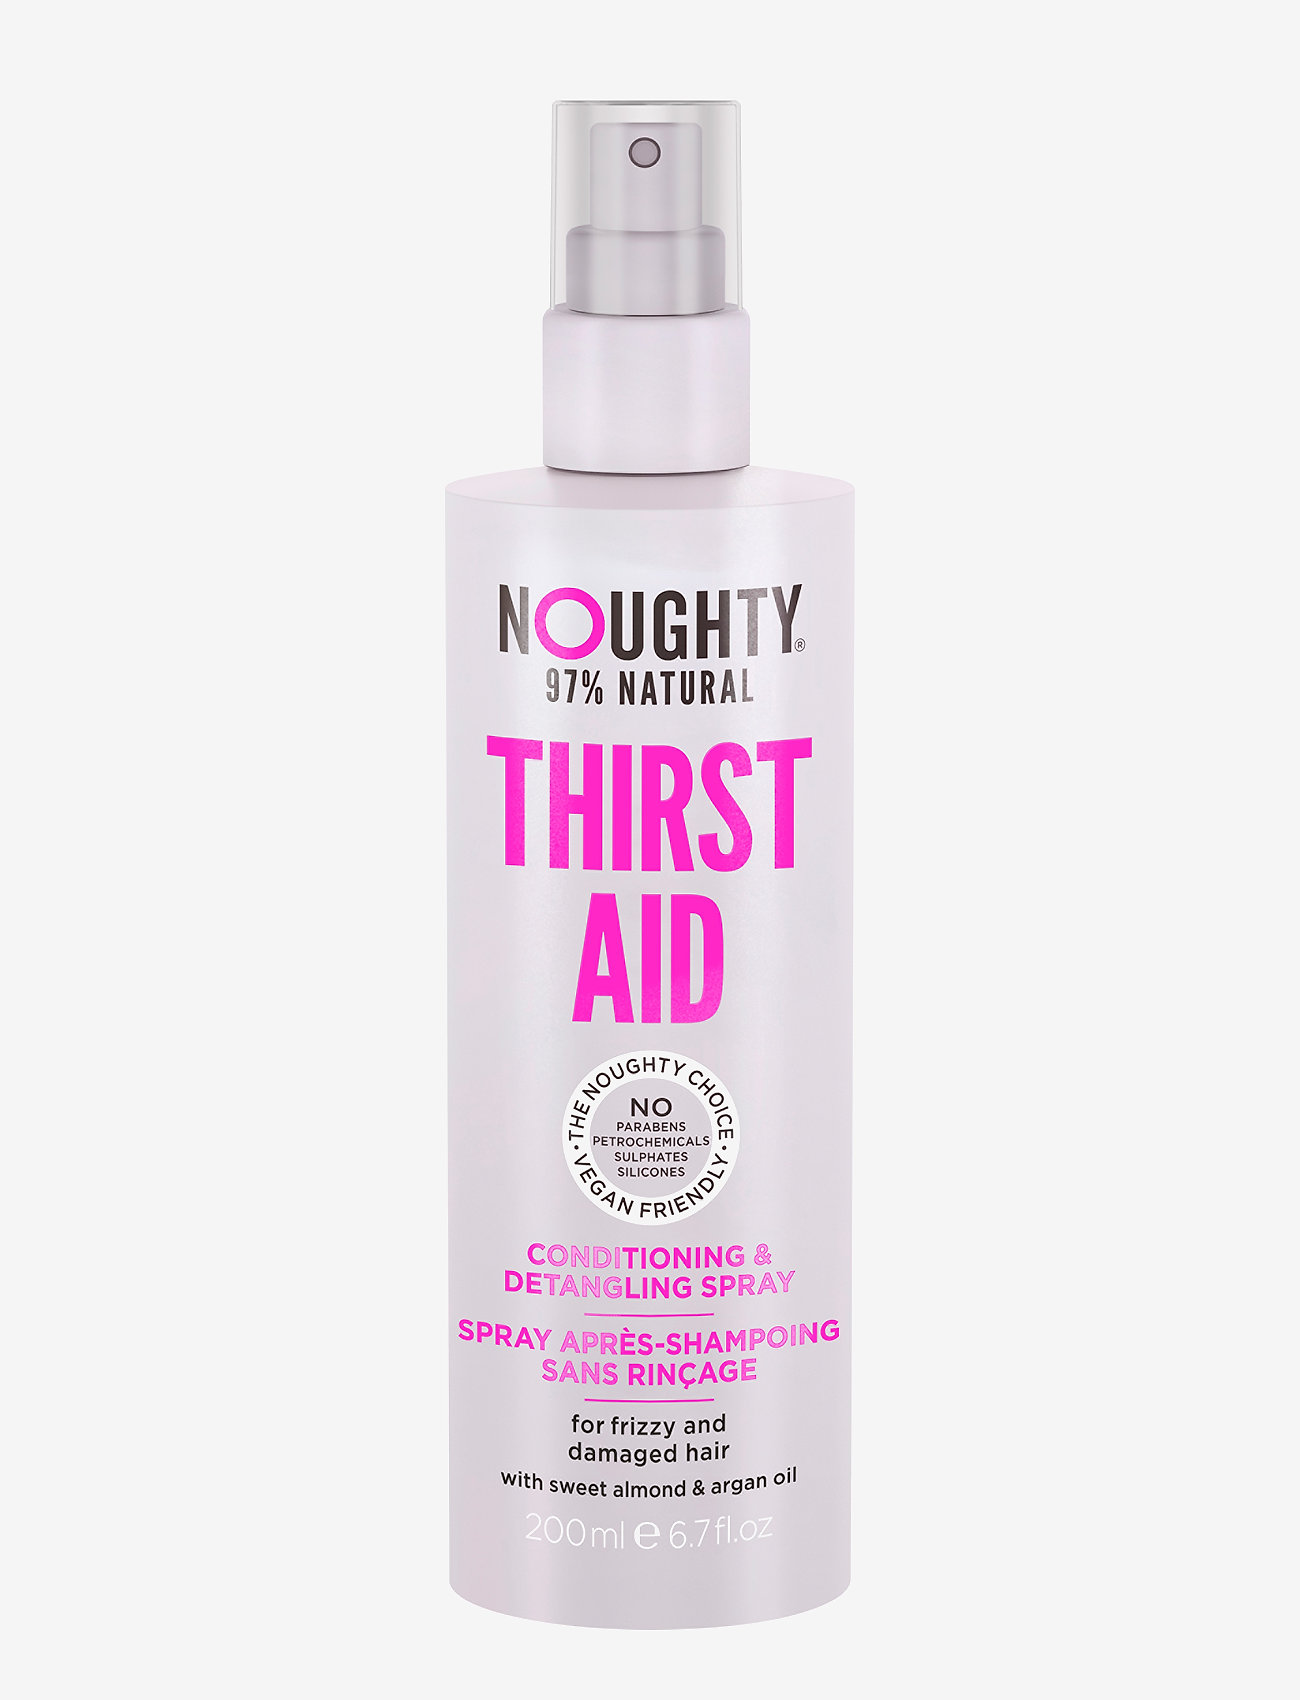 Noughty - Thirst Aid Conditioning and Detangling Spray - balsam-spray - nautral - 0